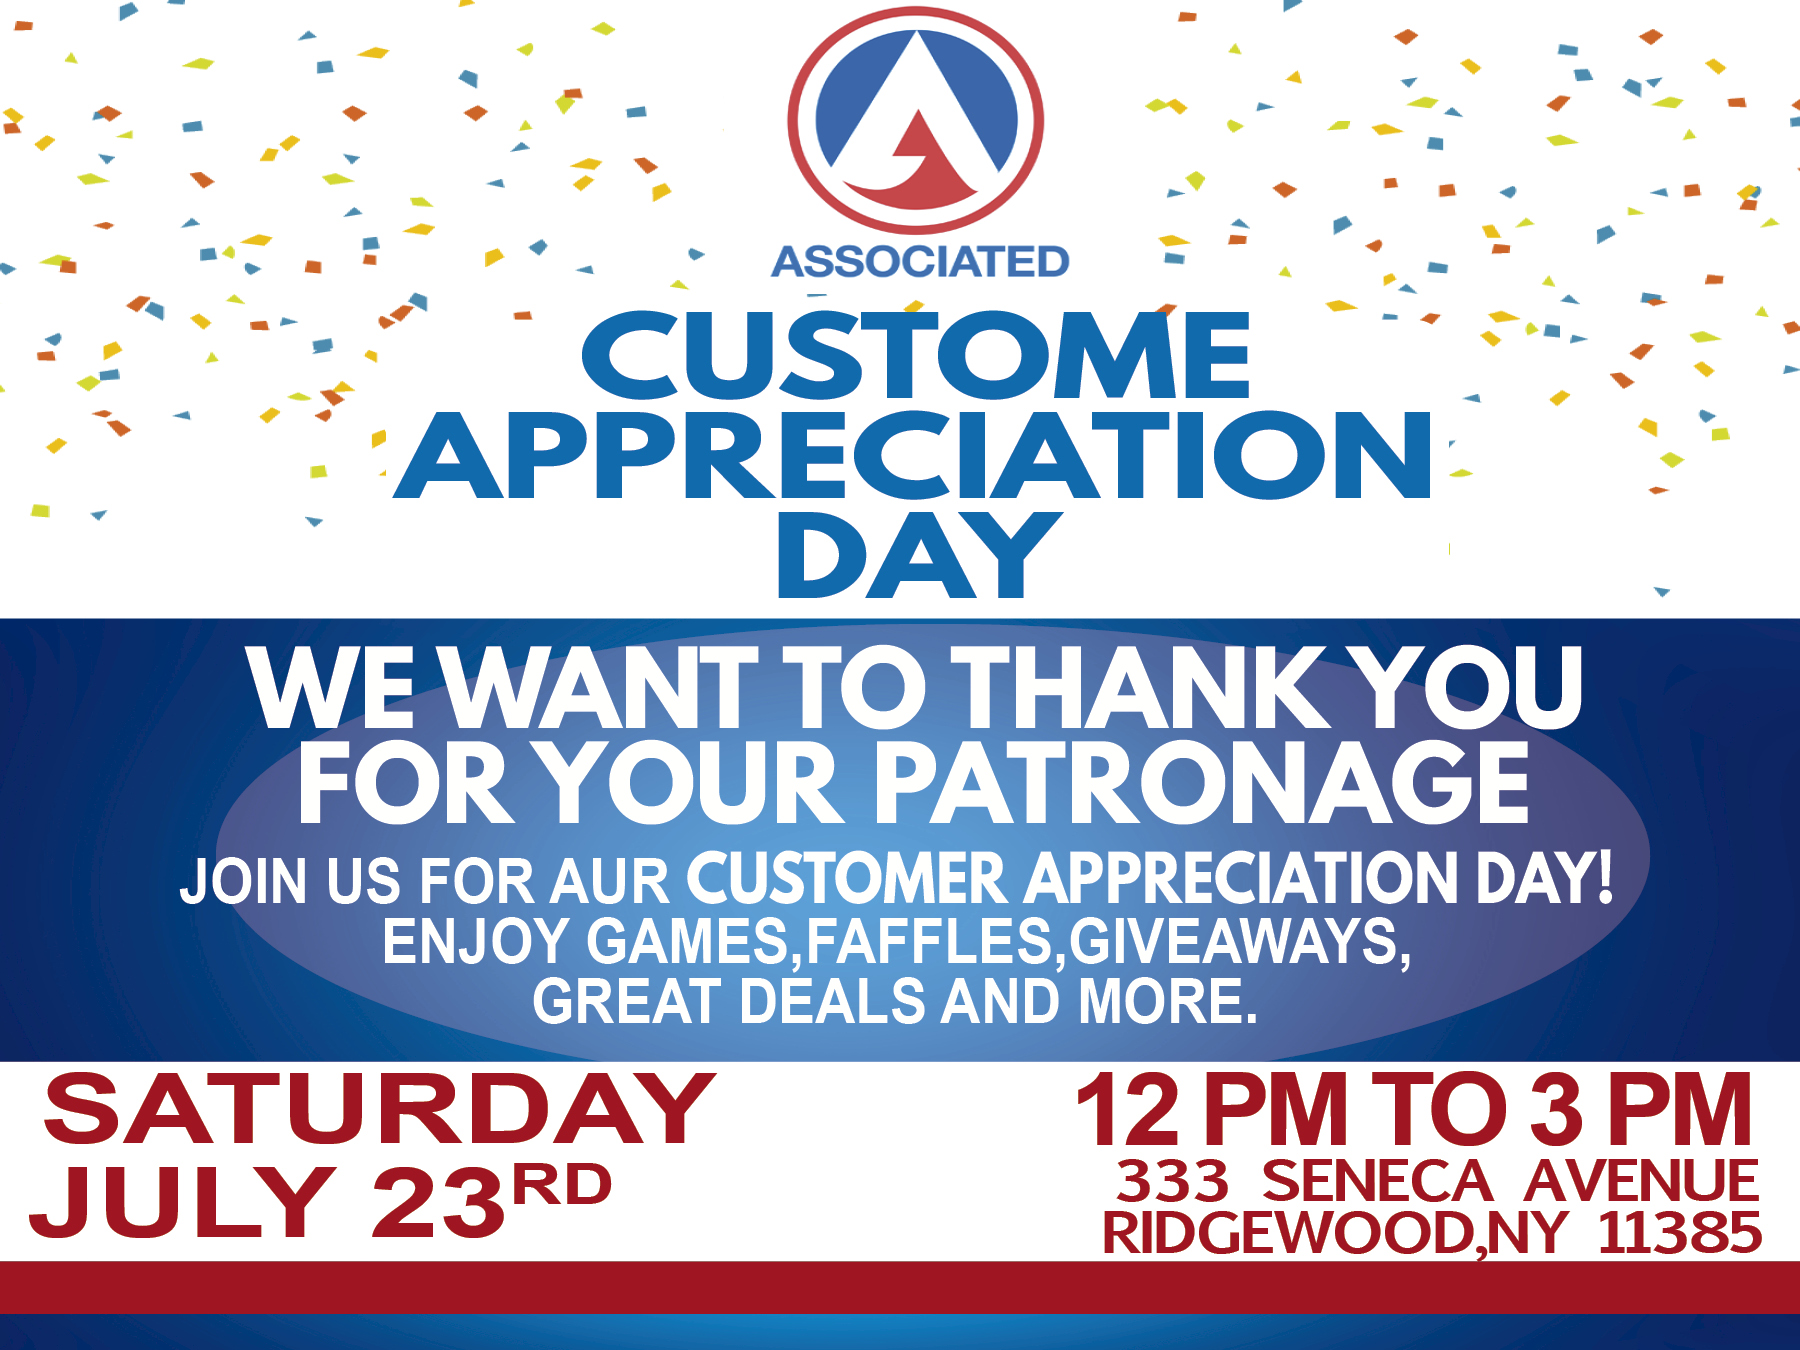 LL” CUSTOME
: © APSRECIATION'
DAY

ASE TTR GE
FOR YOUR PATRONAGE

JOIN US FOR AUR CUSTOMER APPRECIATION DAY!
ENJOY GAMES, FAFFLES,GIVEAWAYS,
GREAT DEALS AND MORE.

SATURDAY 12PM TO 3 PM

RD 333 SENECA AVENUE
JULY 23 RIDGEWOOD,NY 11385